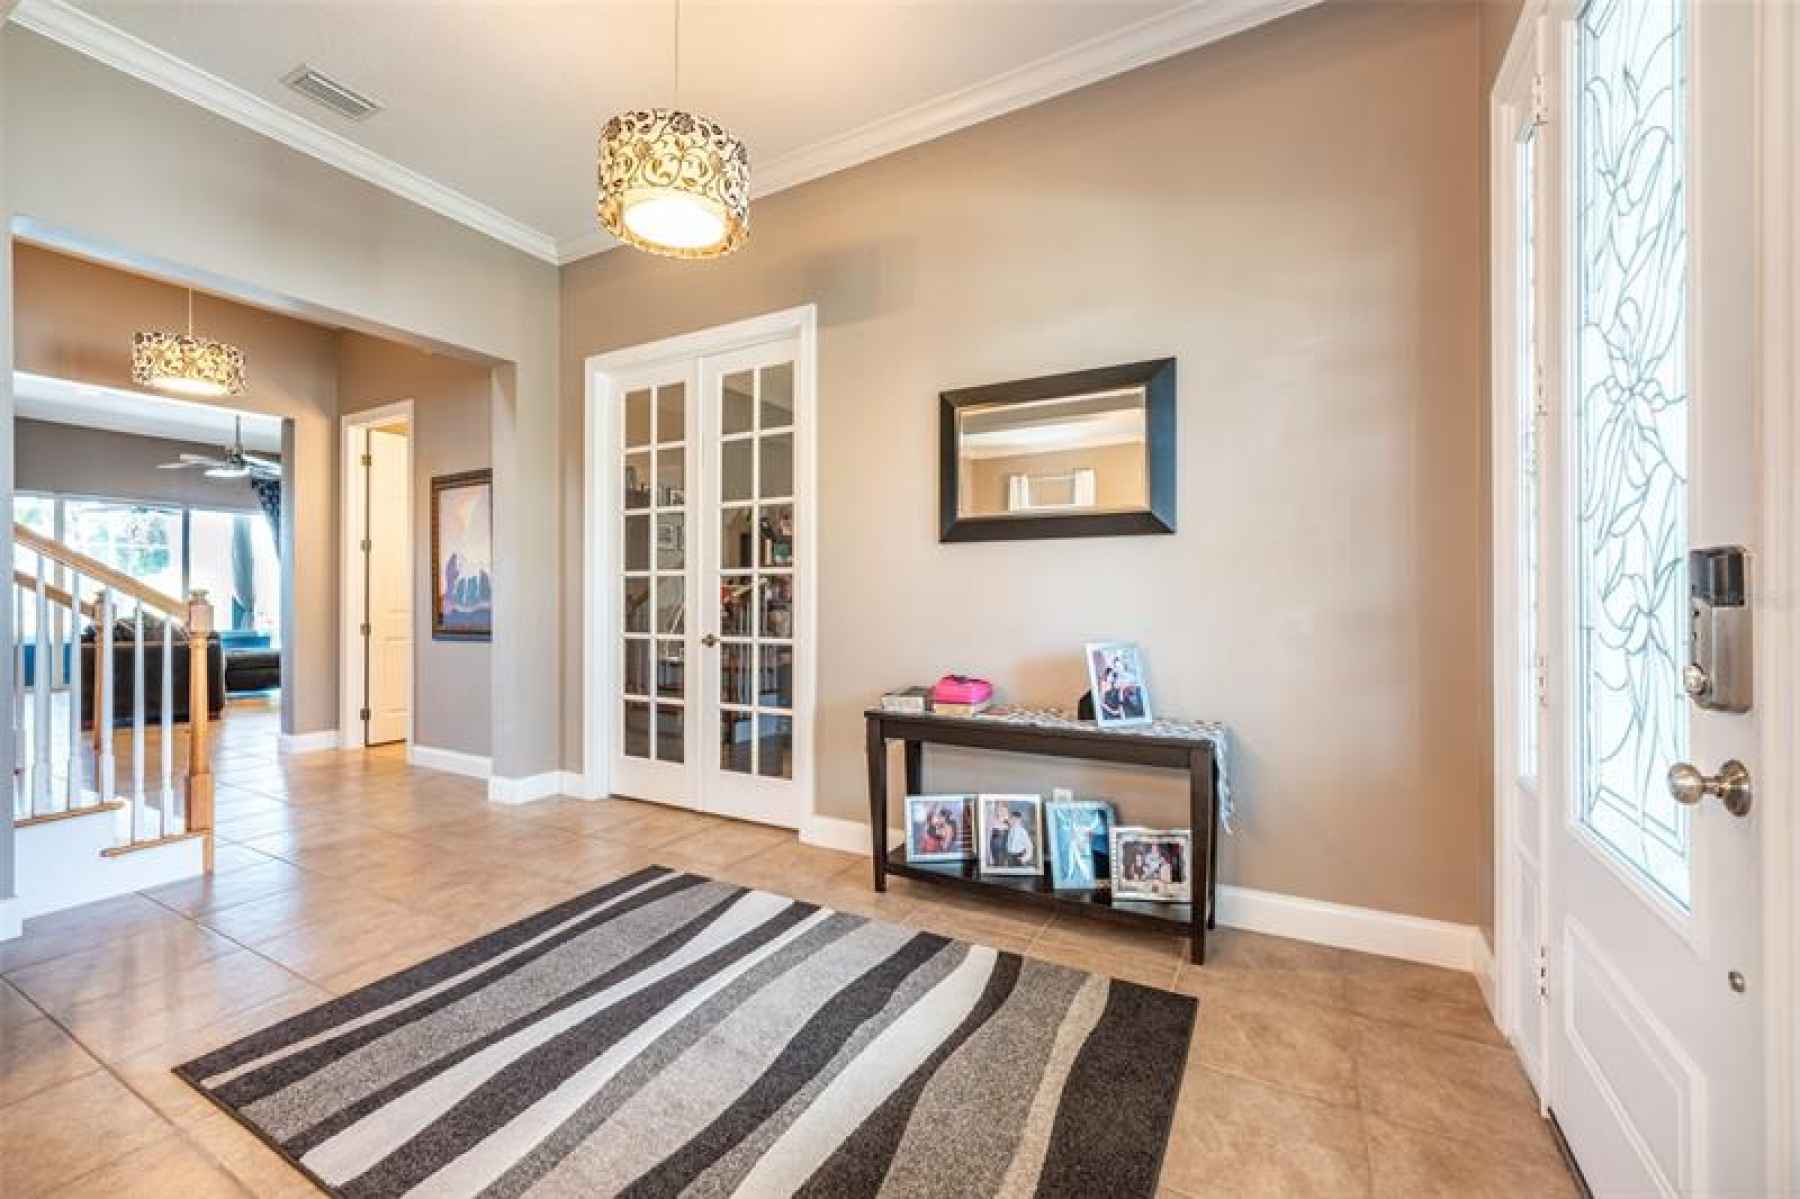 Expansive foyer to gather and welcome your family and friends.